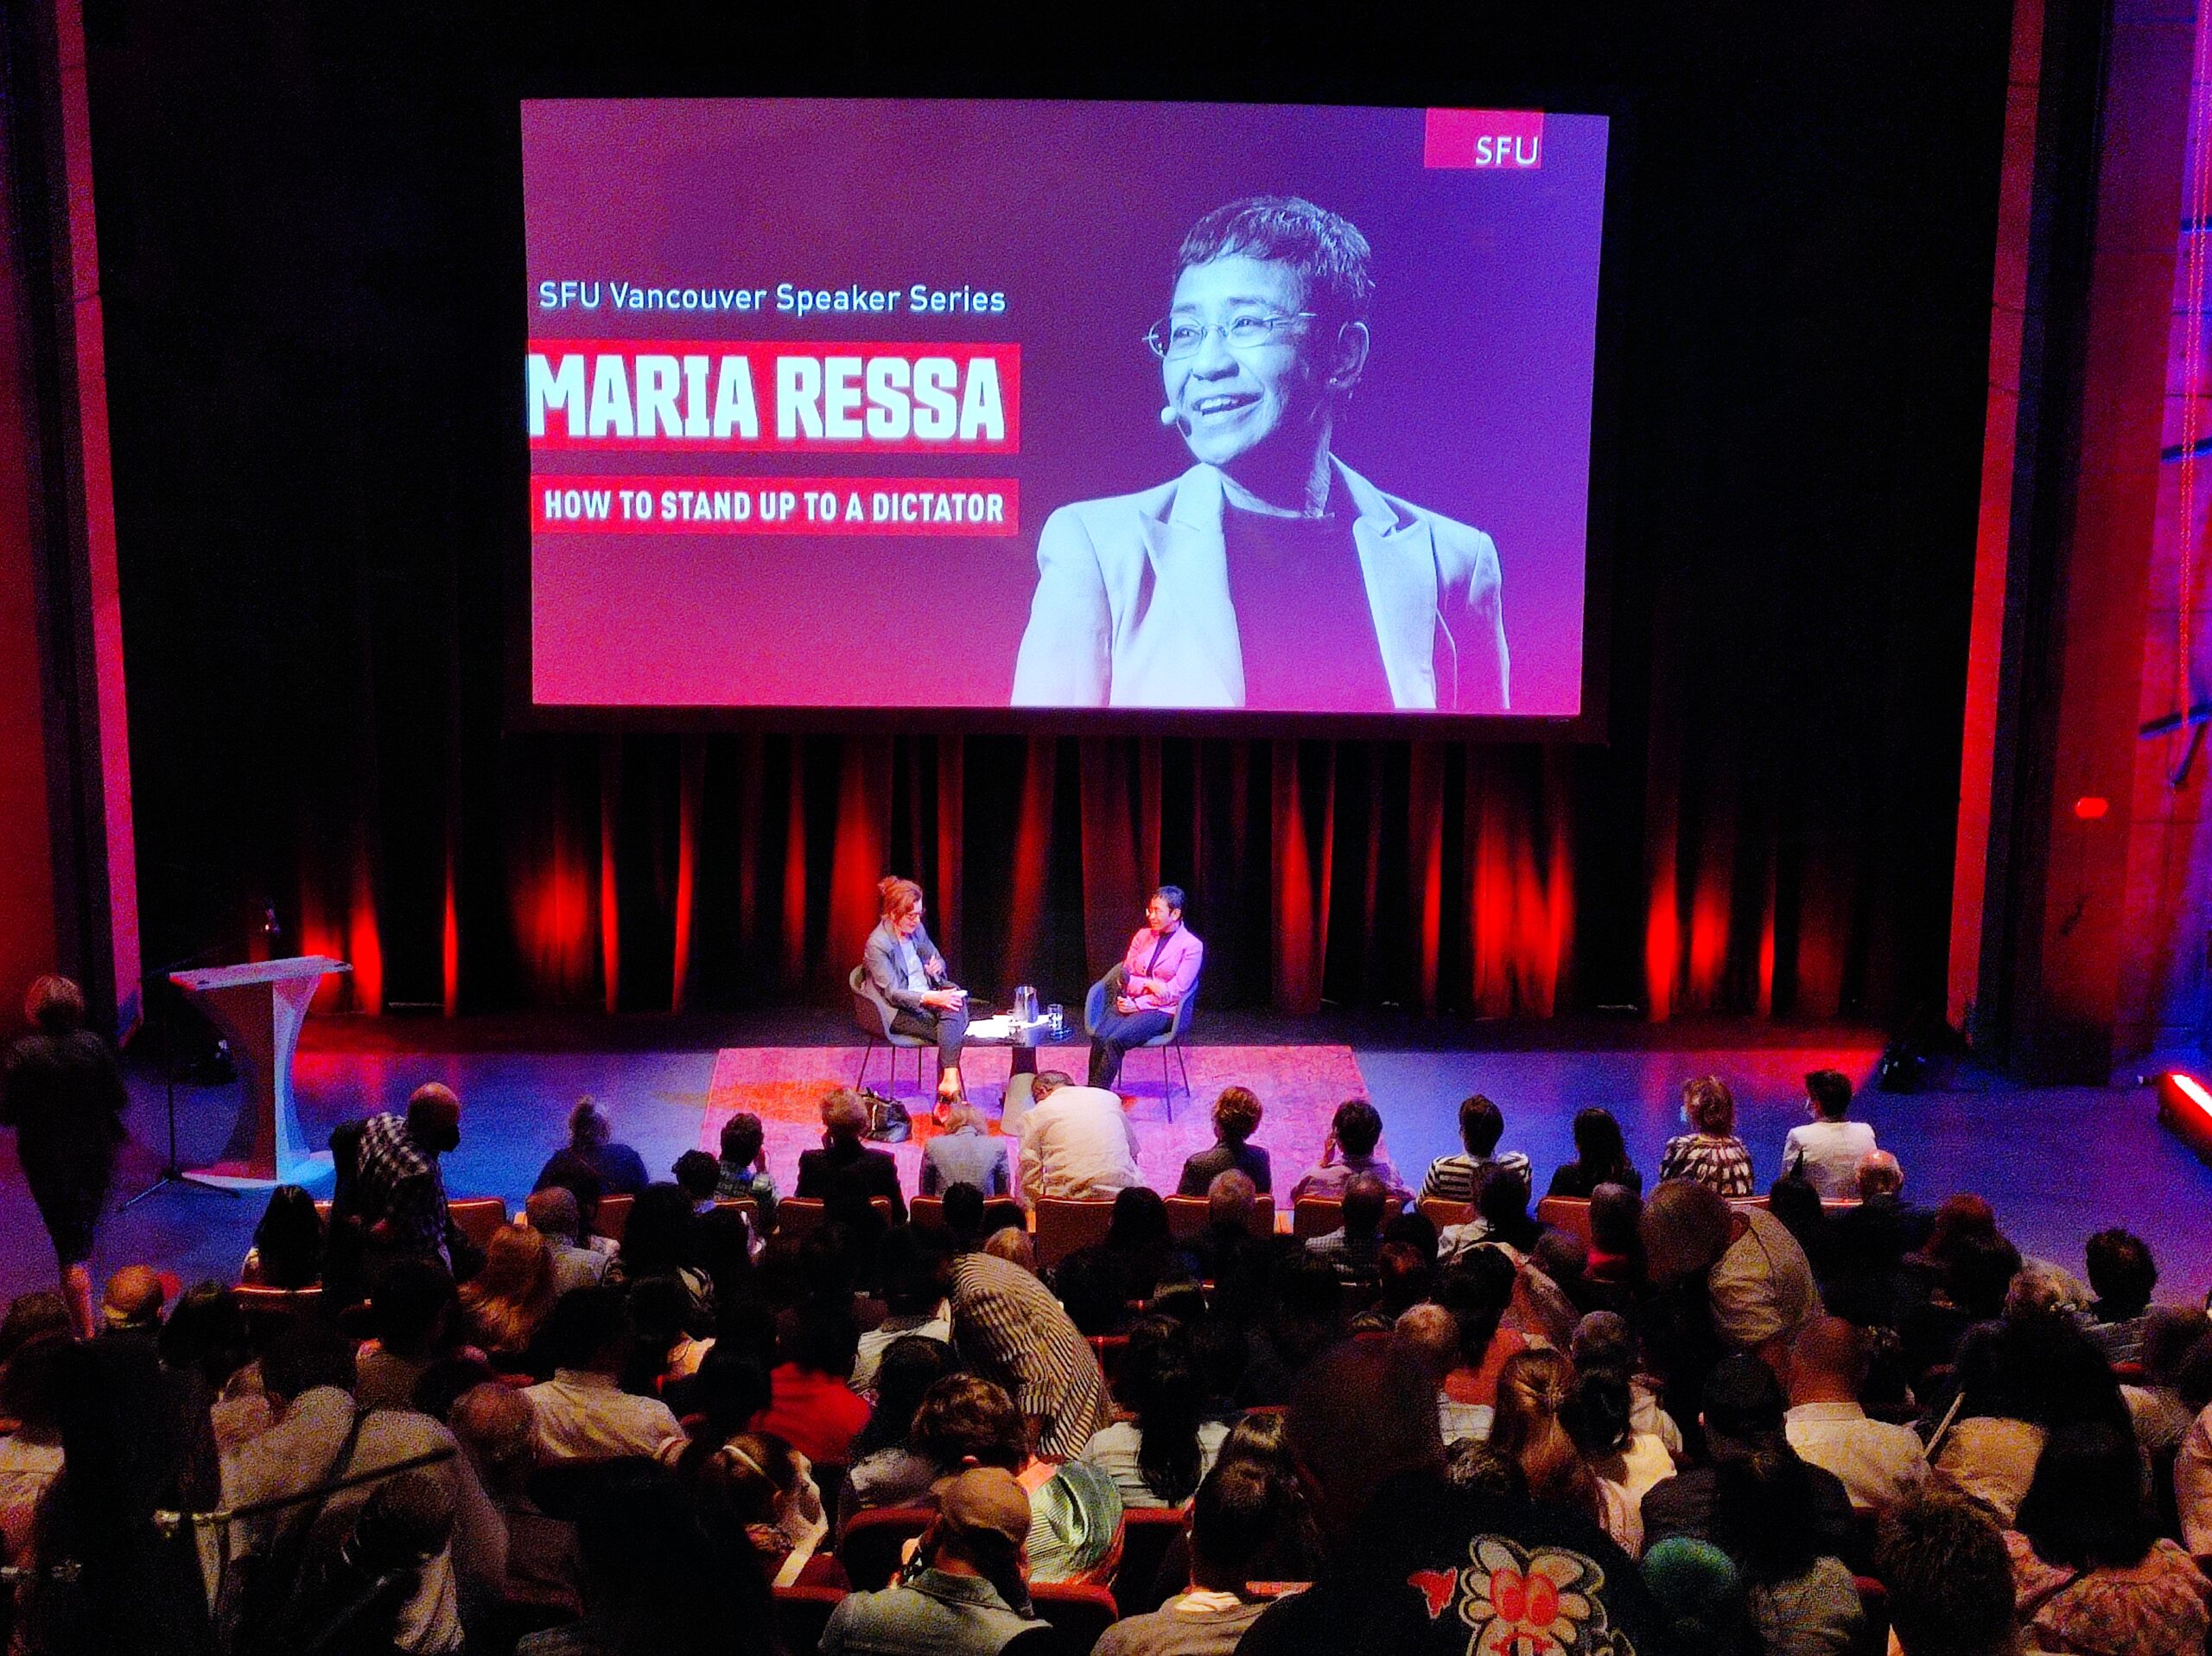 The photo is of Ressa and Off sitting on stage together as they engage in conversation. There are numerous people in the audience before them. A screen behind them has a large photo of Ressa and the title “How to Stand Up to a Dictator.”